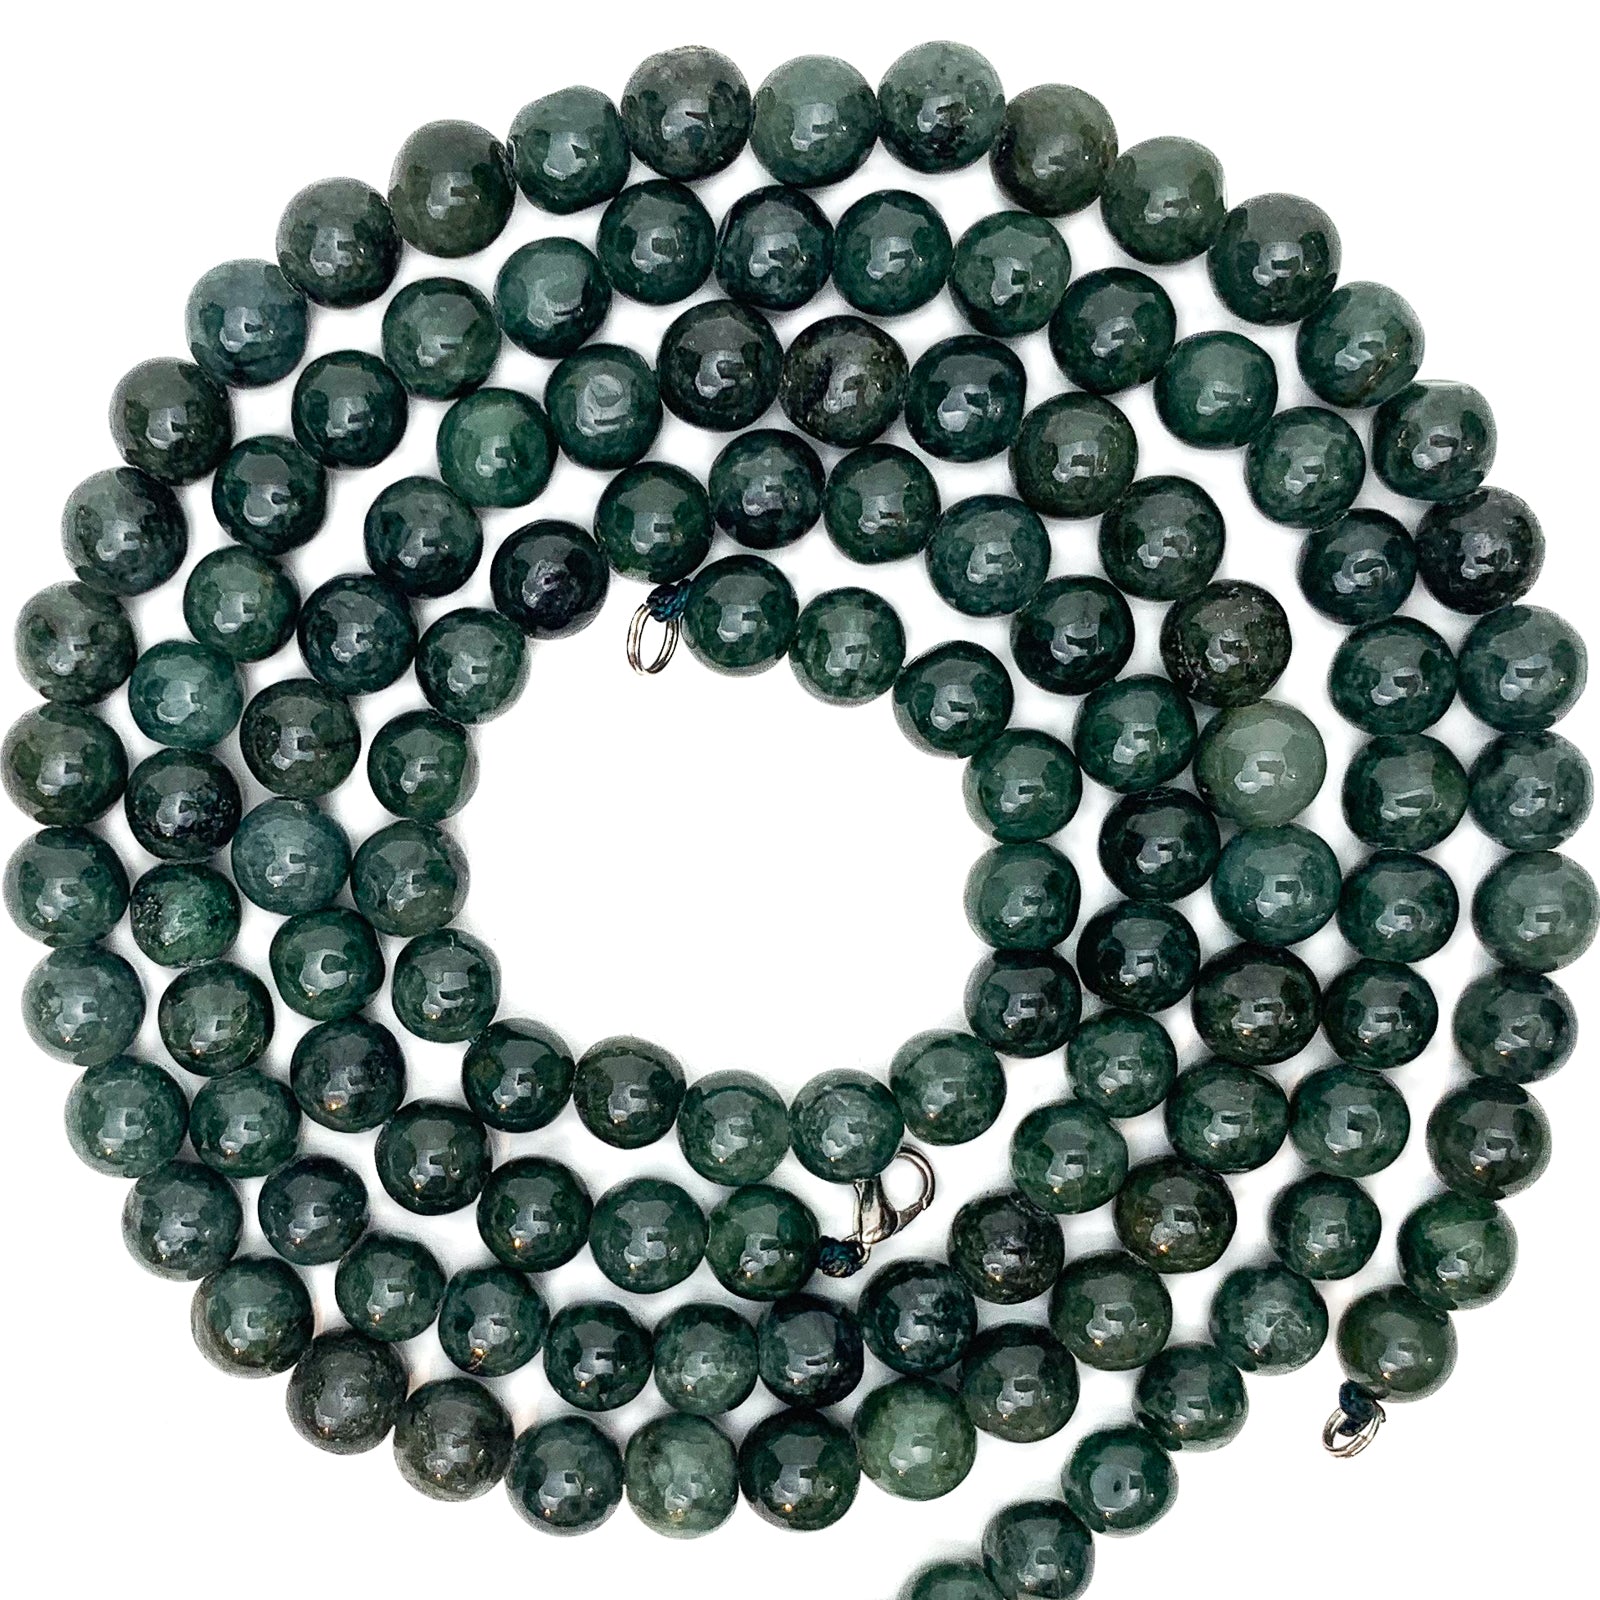 Canadian Jade 10mm Smooth Rounds Bead Strand / Necklace – Beads of Paradise